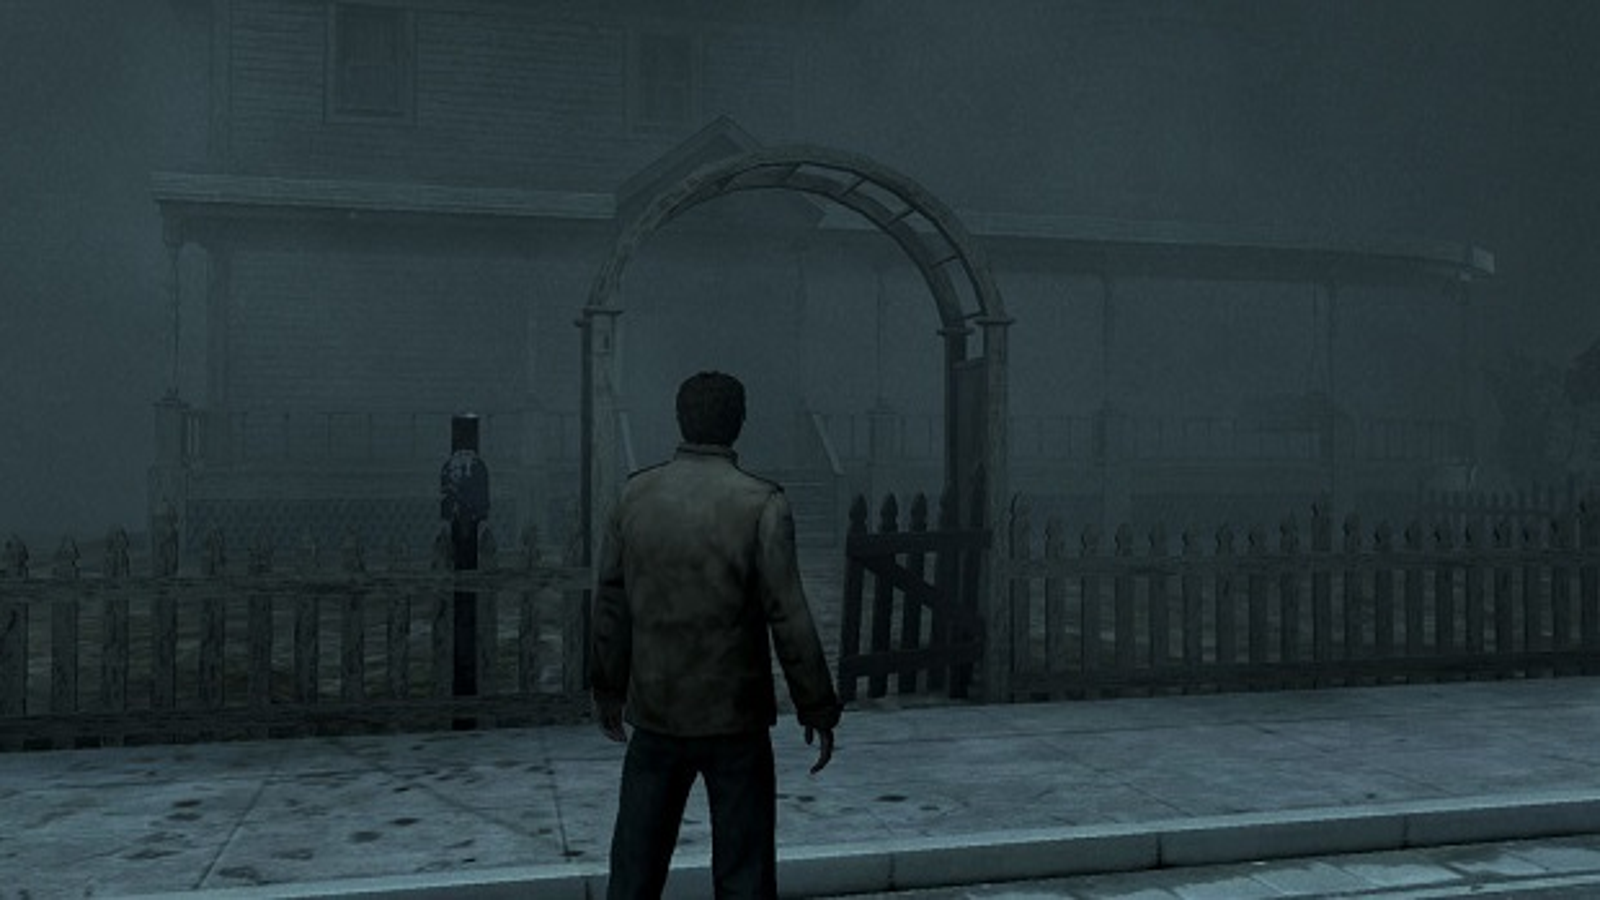 Silent Hill: Homecoming Didn't Understand What Made the Series